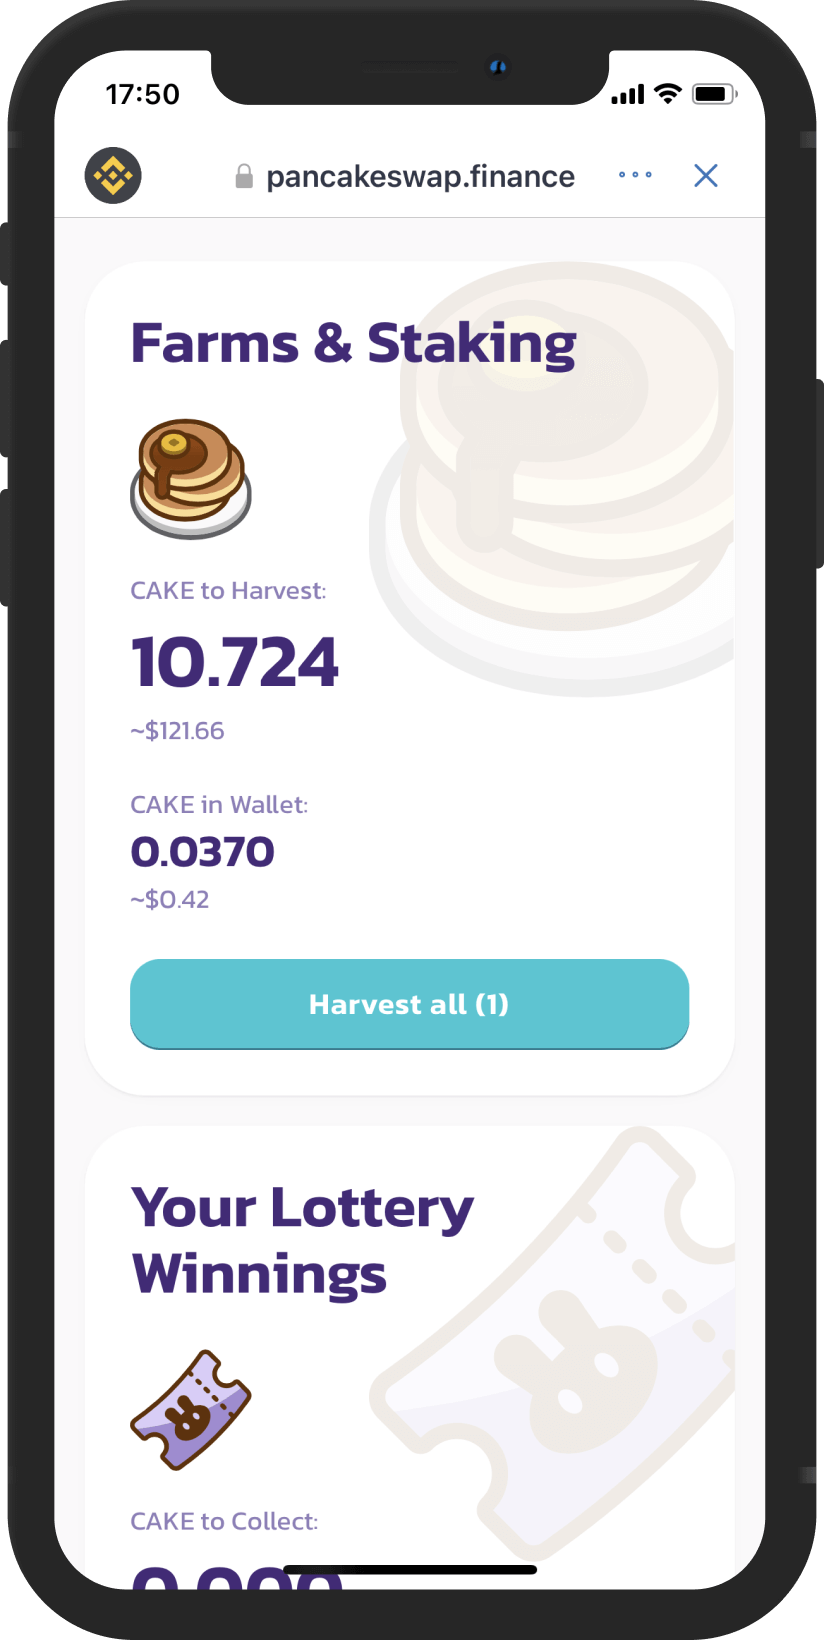 Shows a mockup how cake earnings could look like